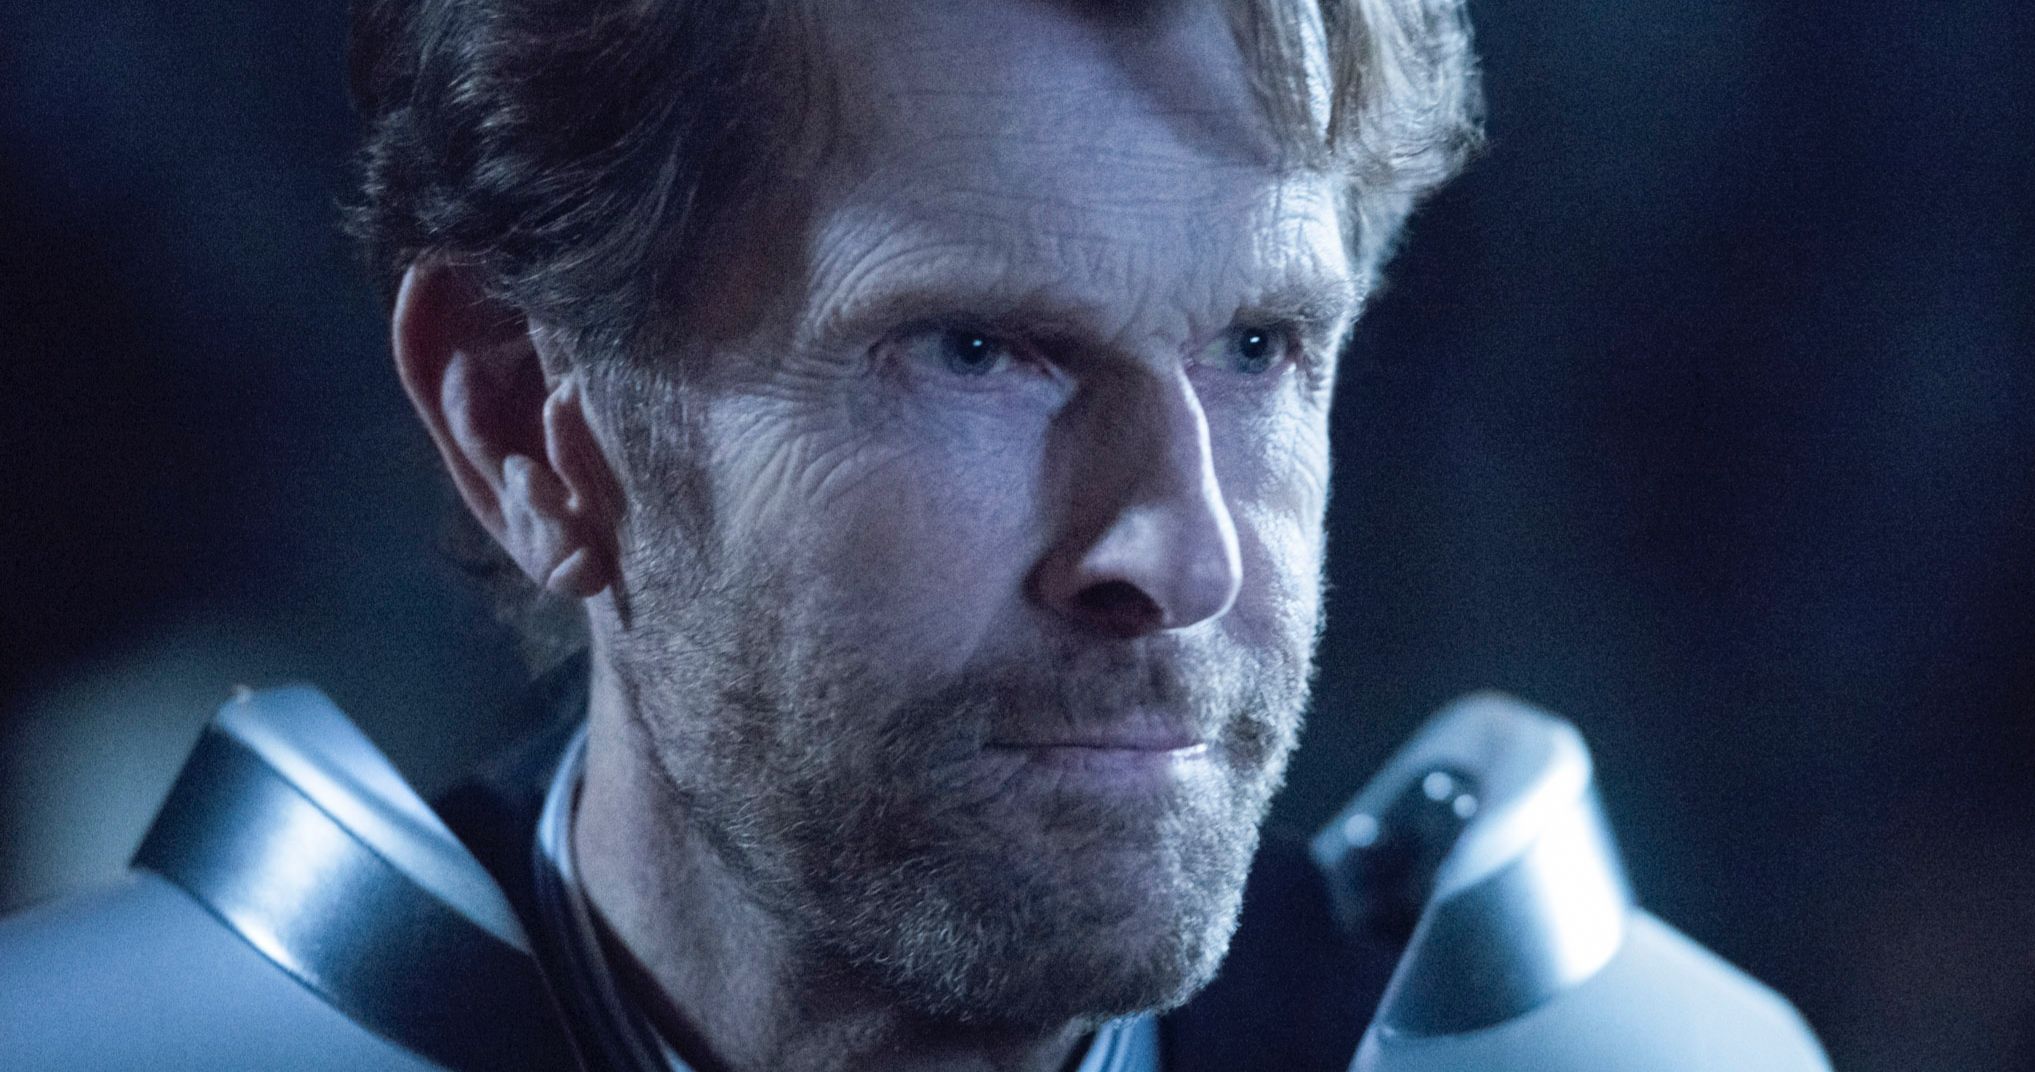 Batman Favorite Kevin Conroy Jumped at Playing Bruce Wayne in Crisis on Infinite Earths